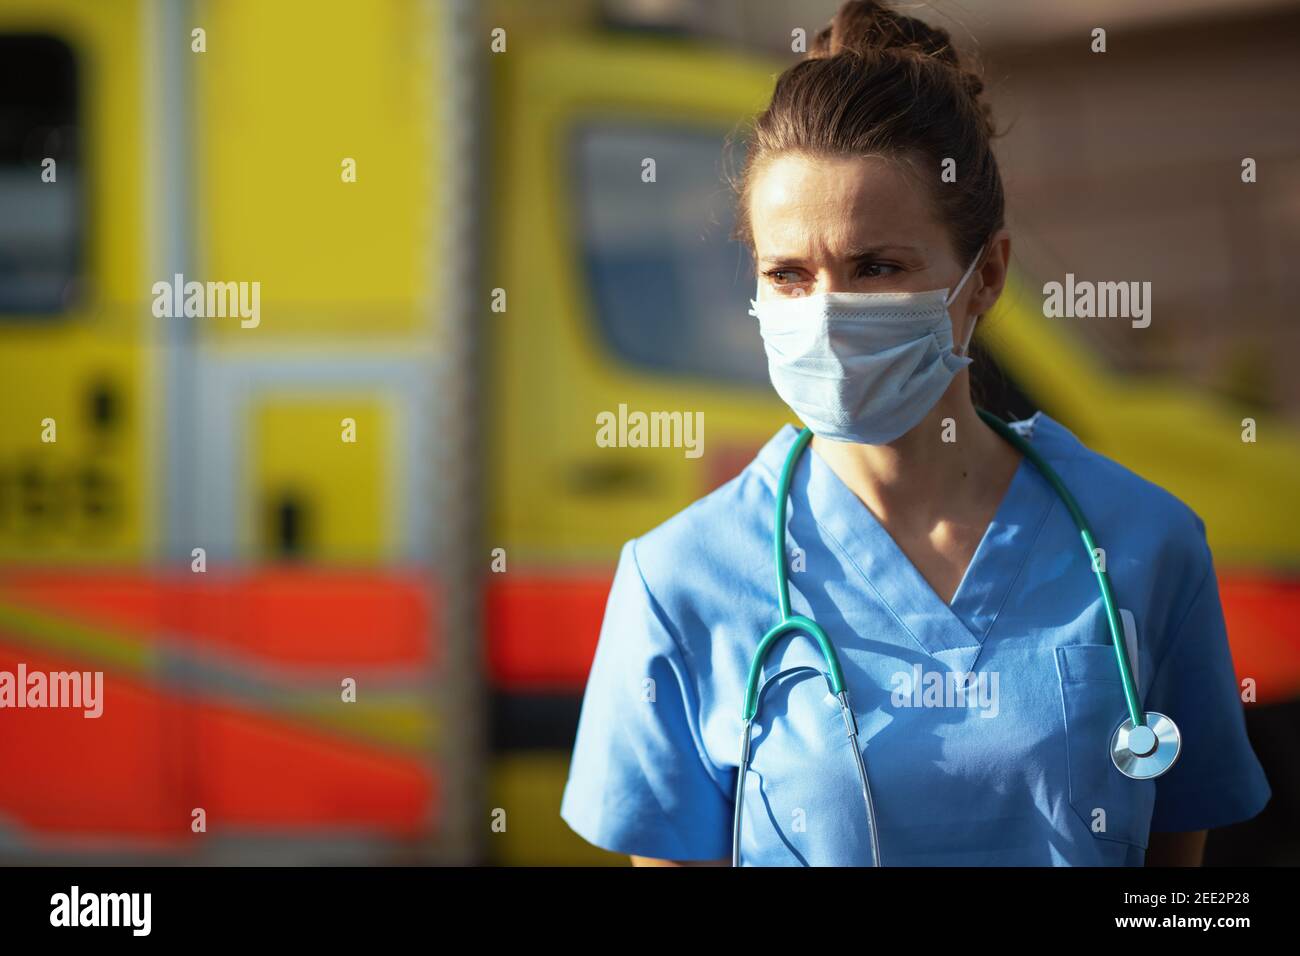 covid-19 pandemic. pensive modern paramedic woman in uniform with stethoscope and medical mask outdoors near ambulance. Stock Photo